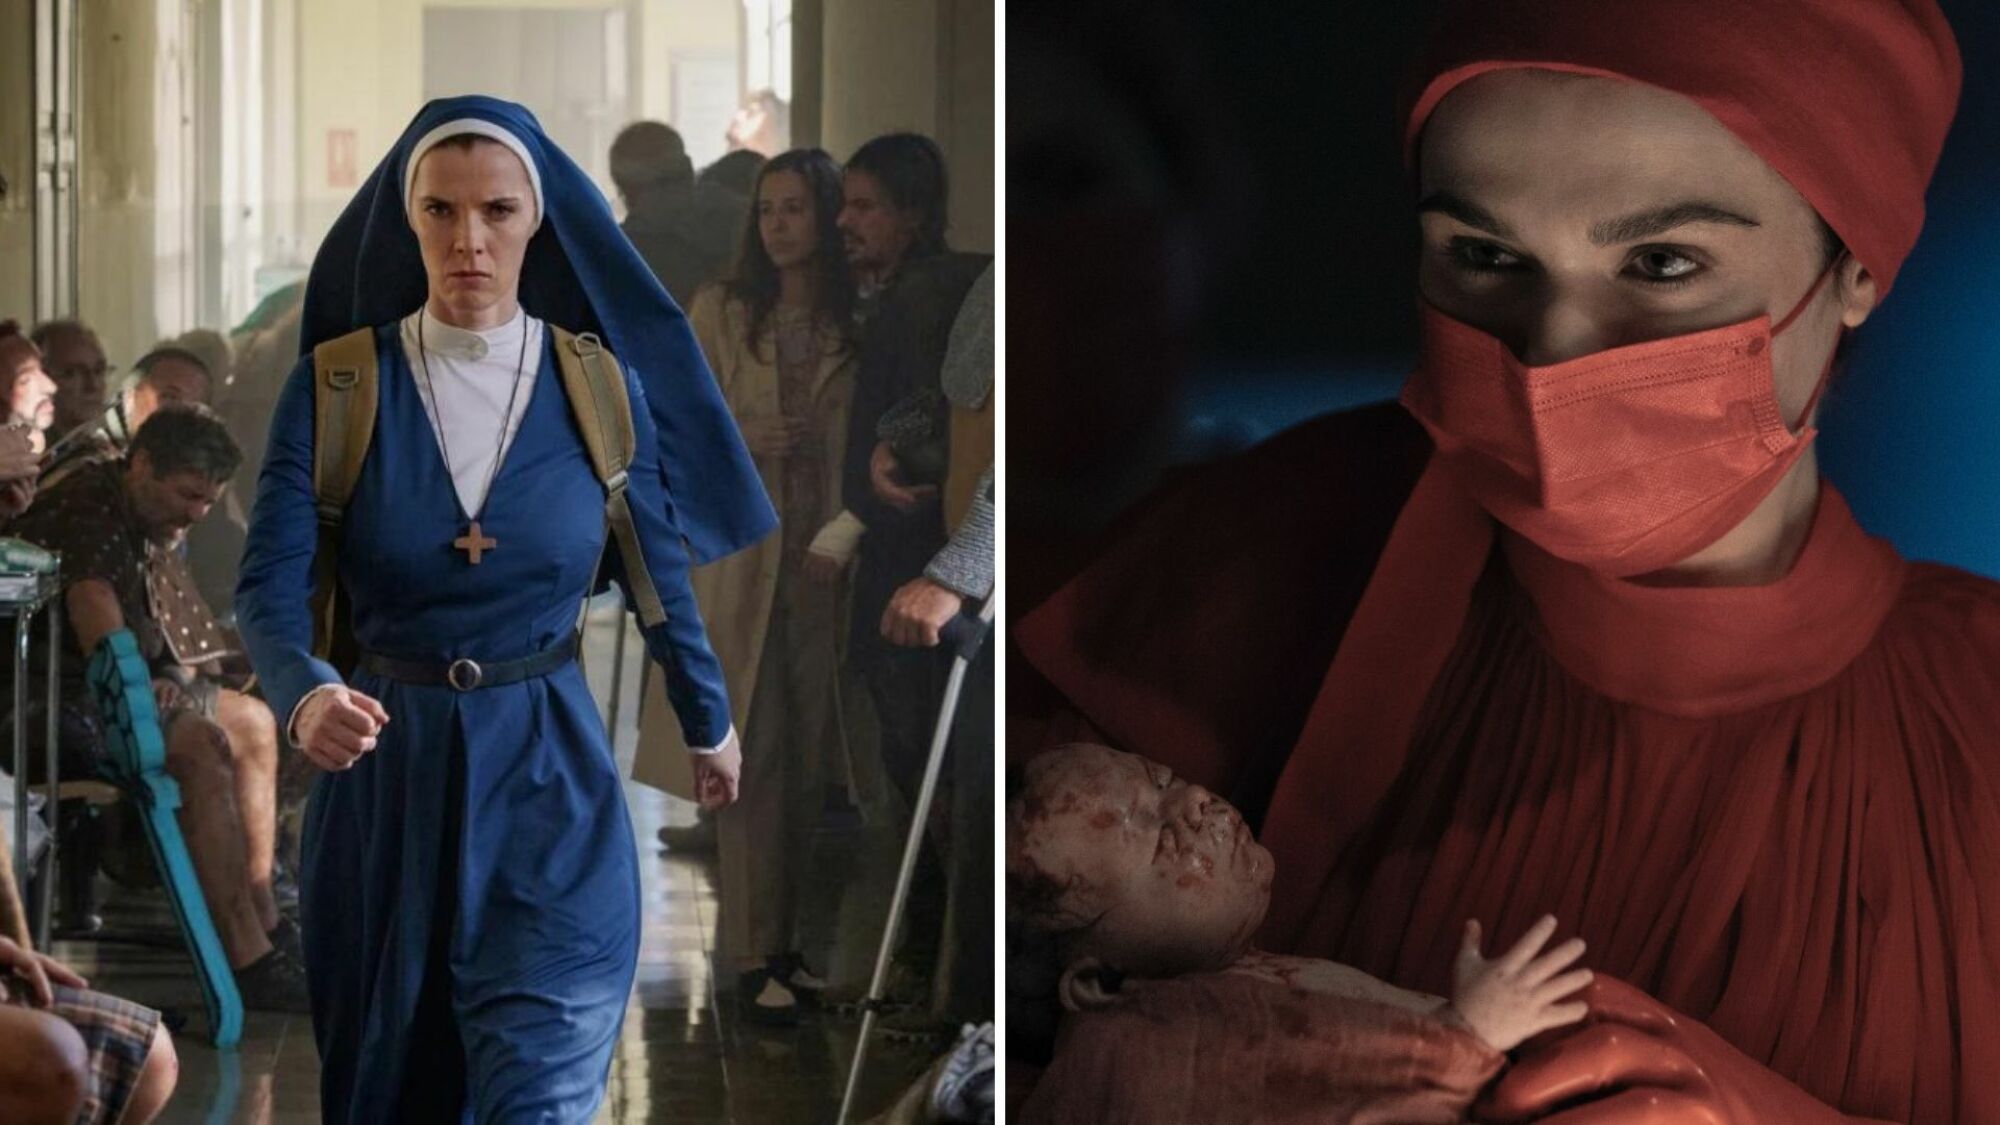 Two images: A nun in a blue habit striding through a hospital hallway full of injured men, and a woman in a red doctor's gown and medical mask holding a baby.